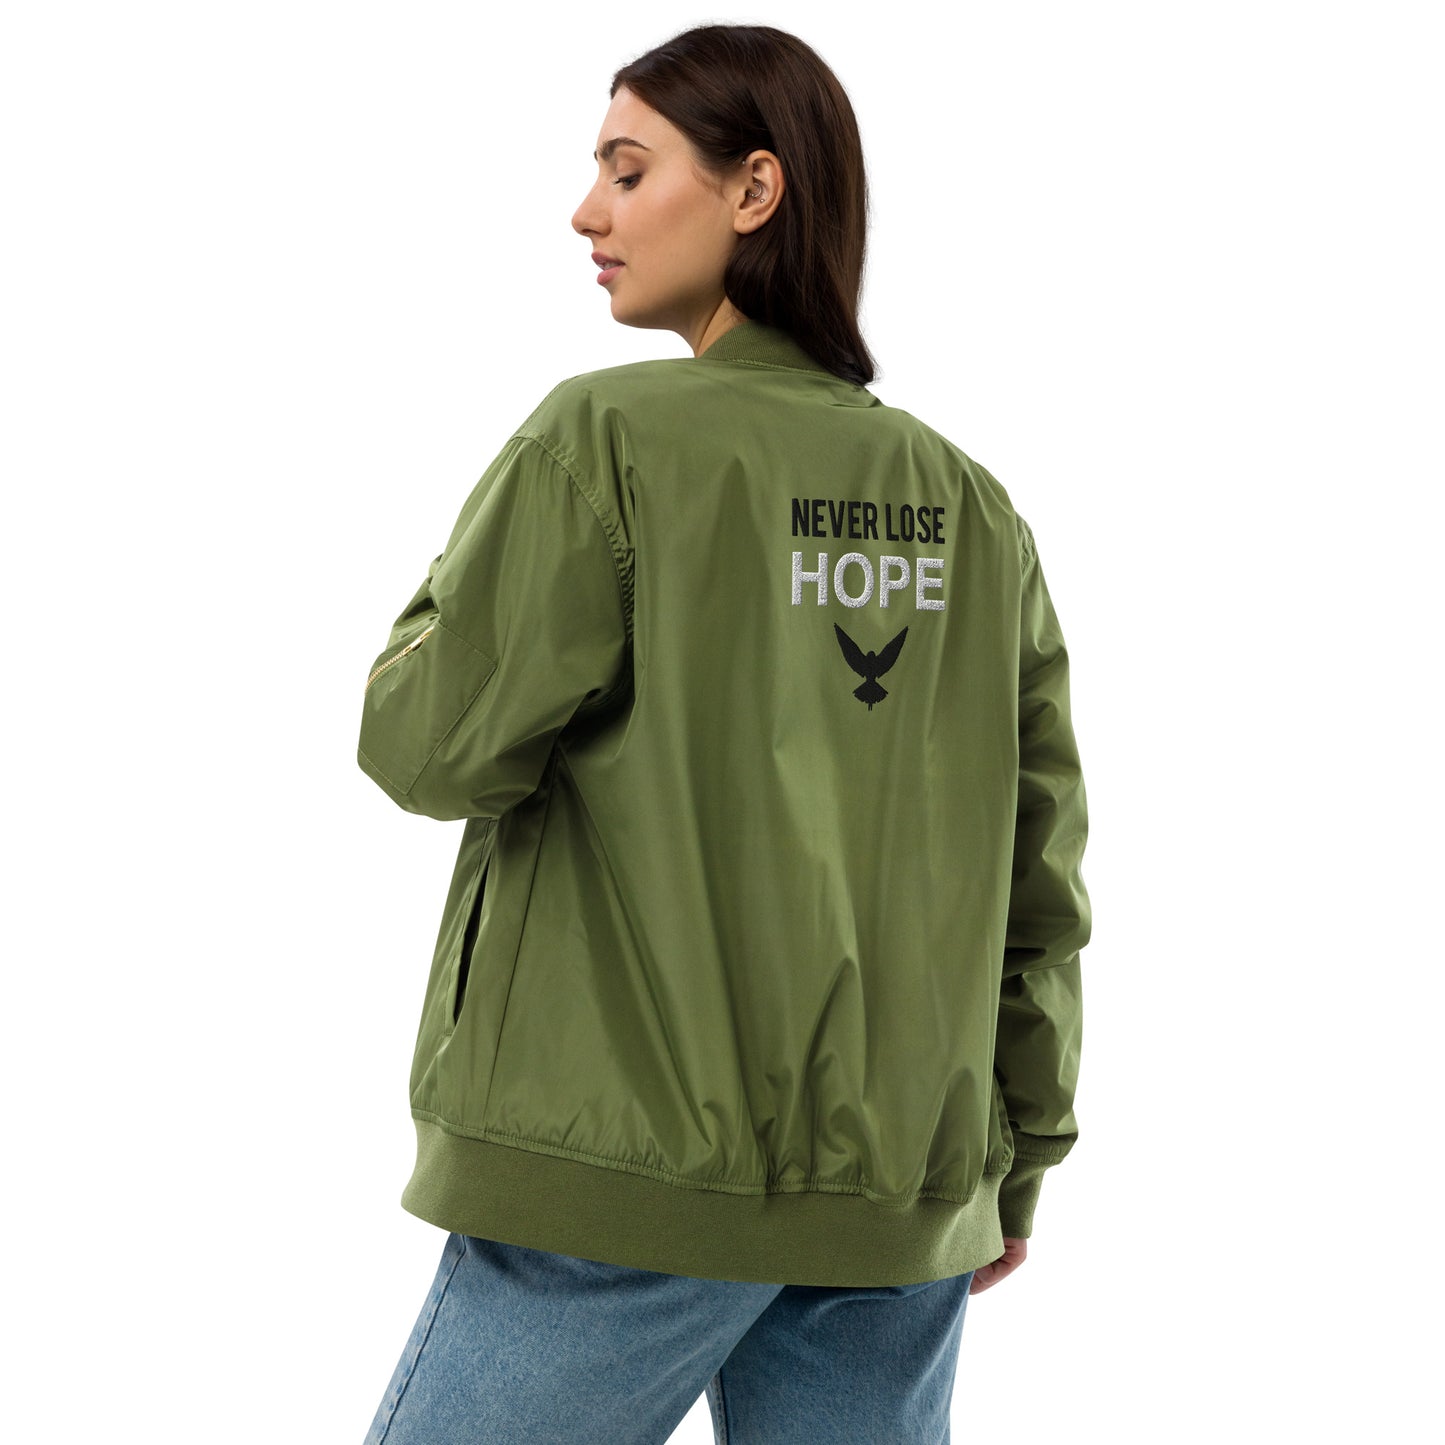 NEVER LOSE HOPE Premium Bomber Jacket - Army Green